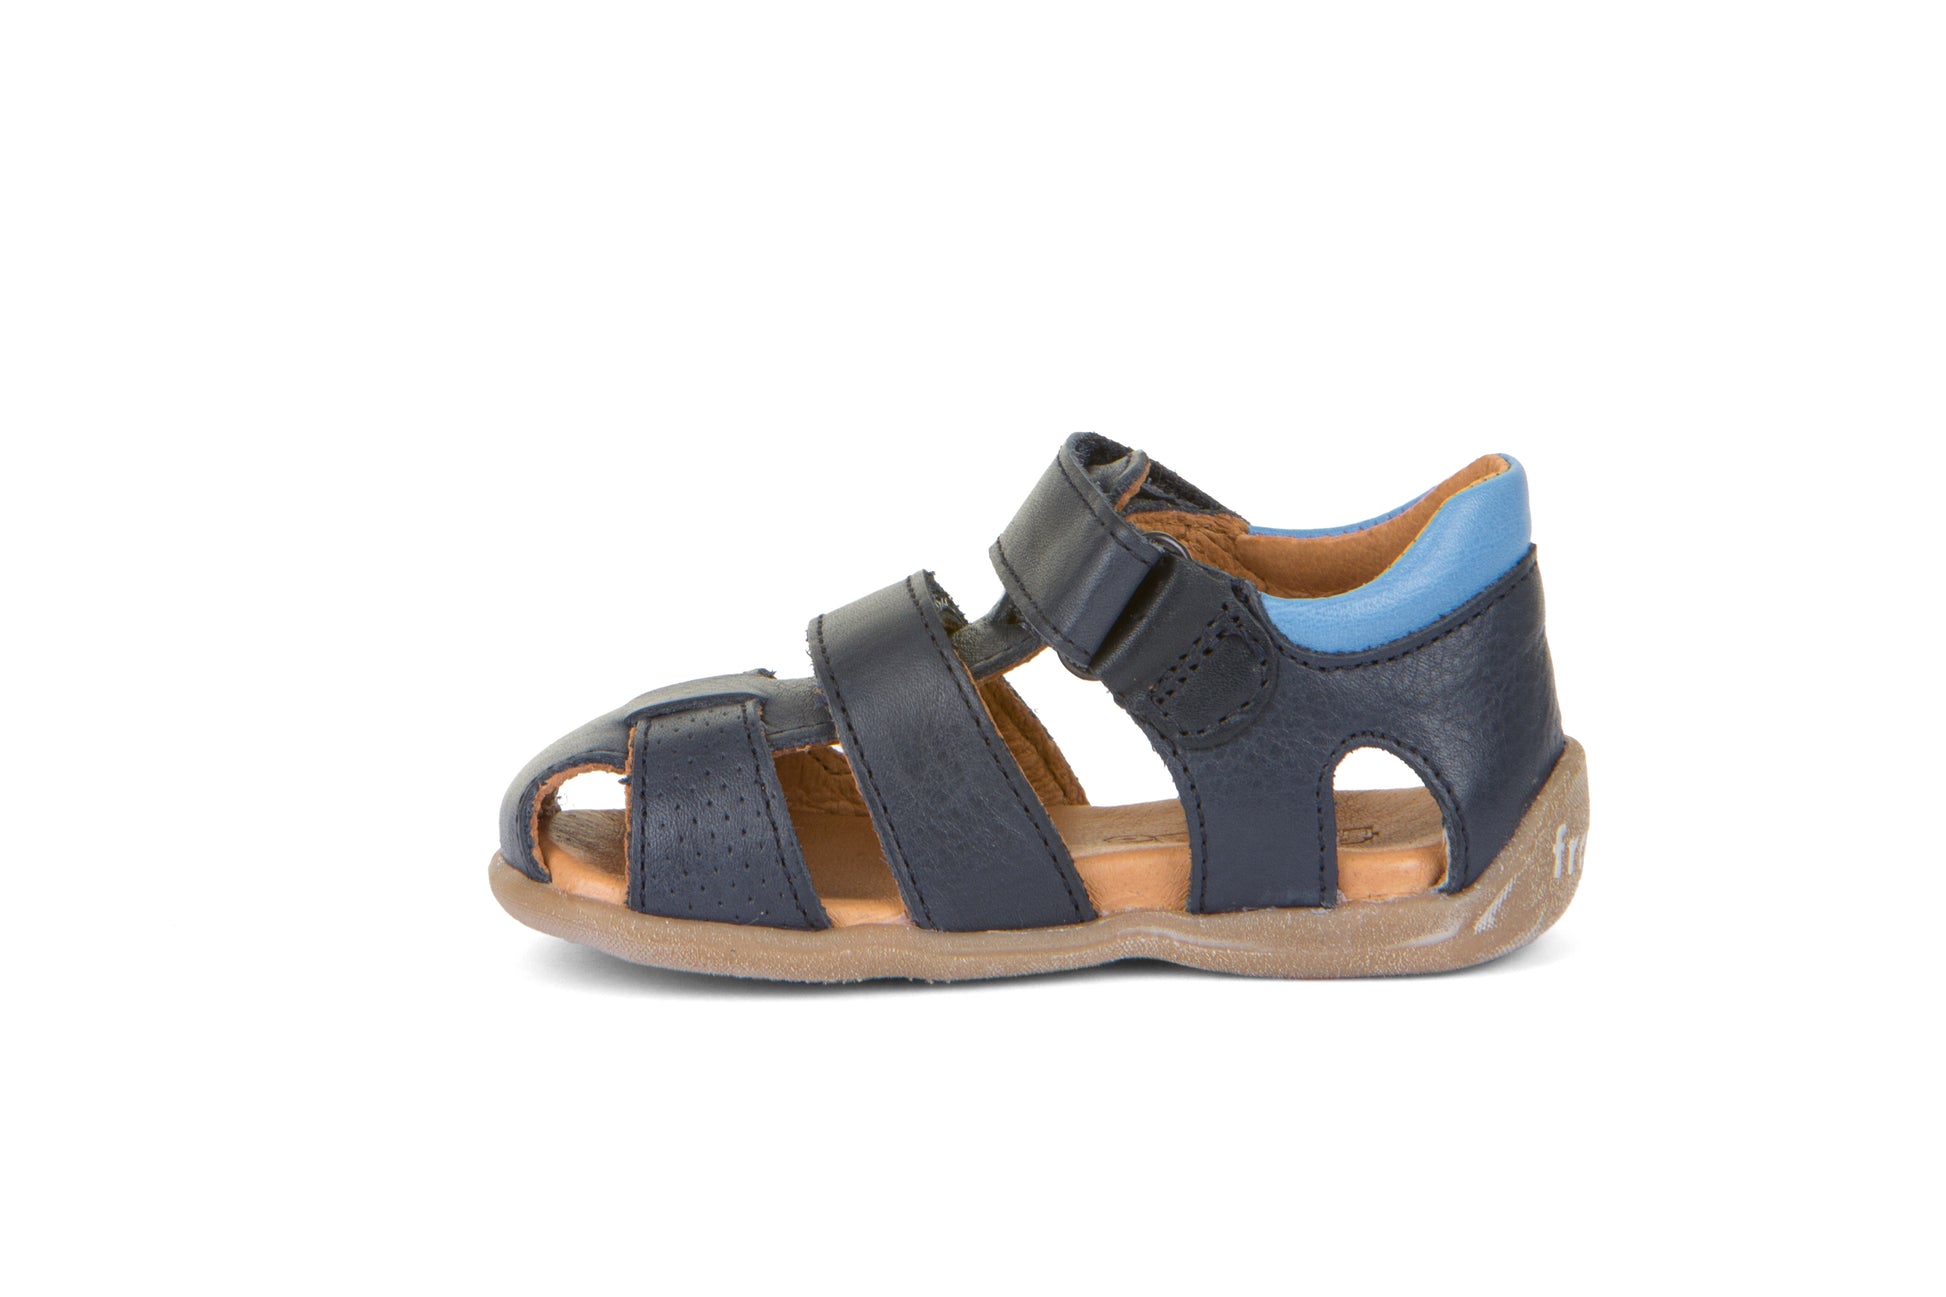 A boys closed toe sandal by Froddo, style G2150169 Carte Double, in navy with light blue collar, velcro fastening. Right inside view.